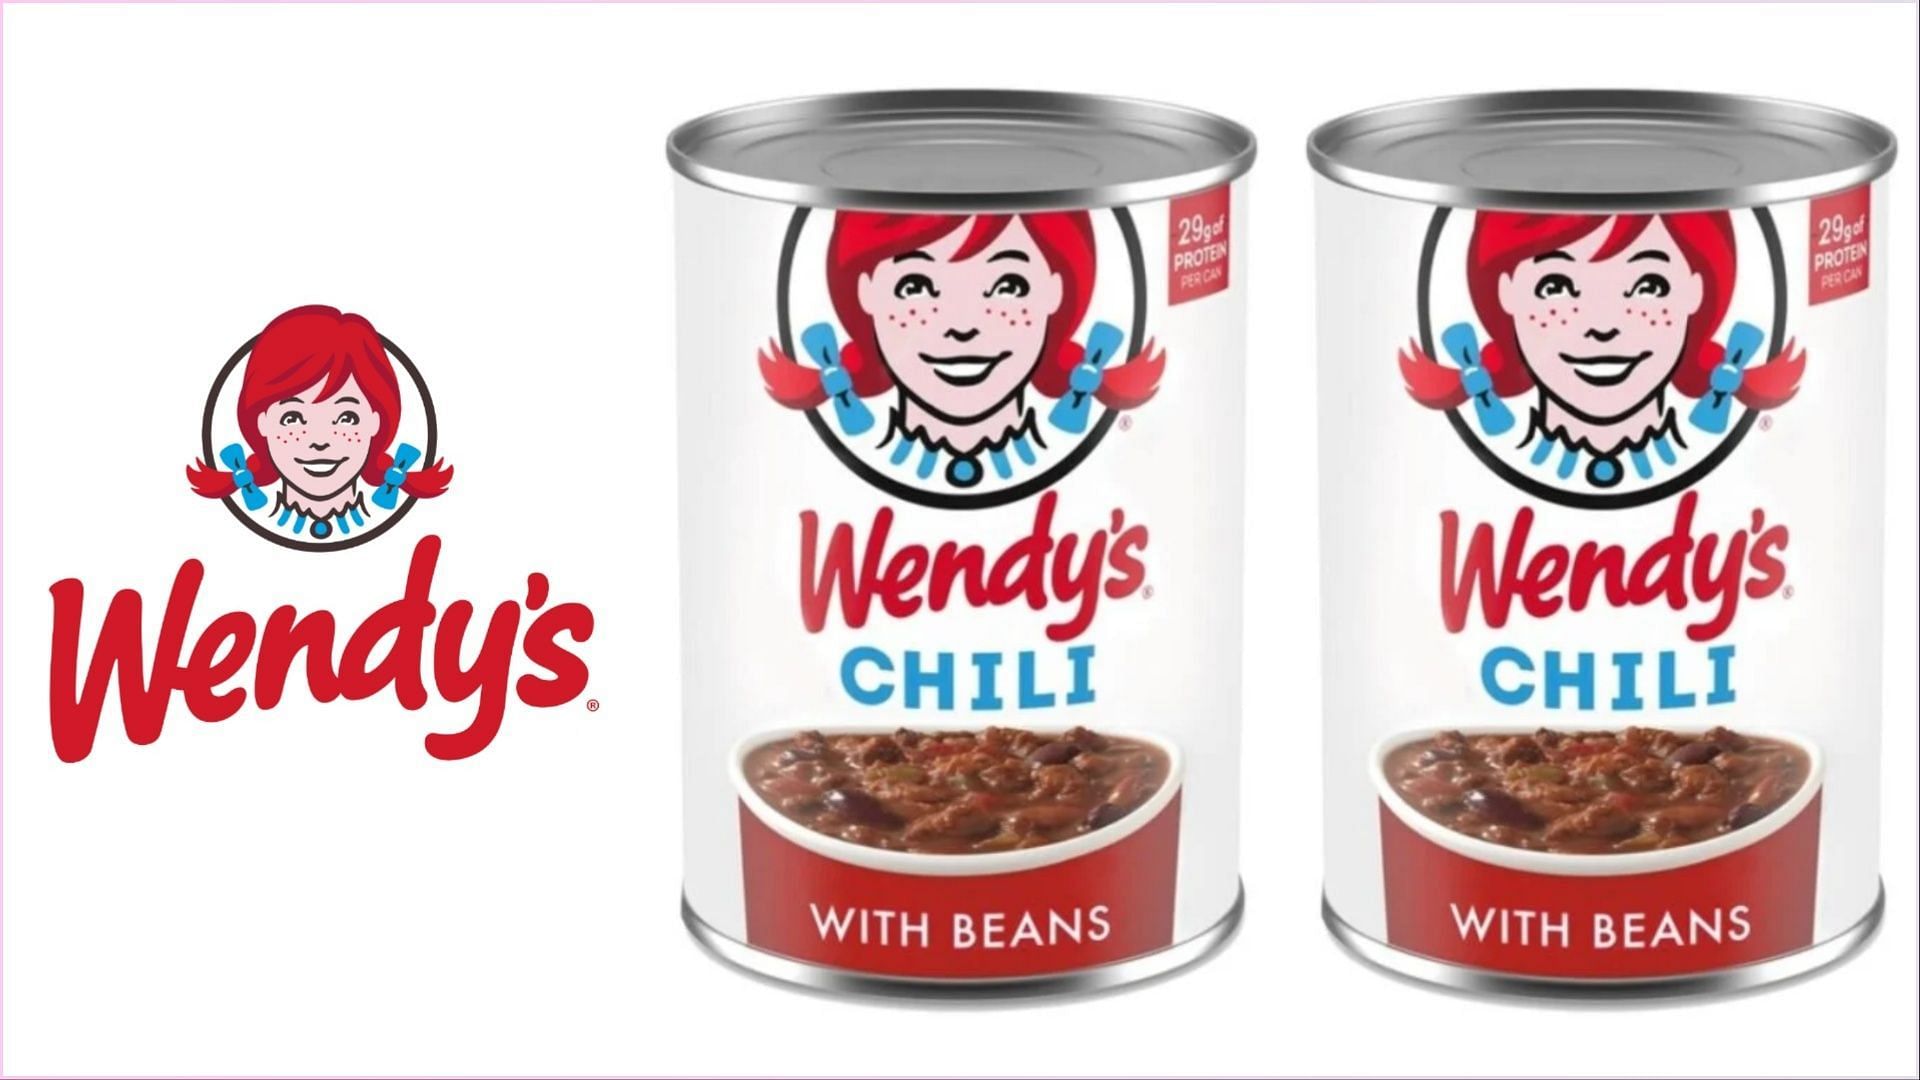 Do you enjoy Wendy's Chili? If you do, is it coming to your local grocery  store? - Quora